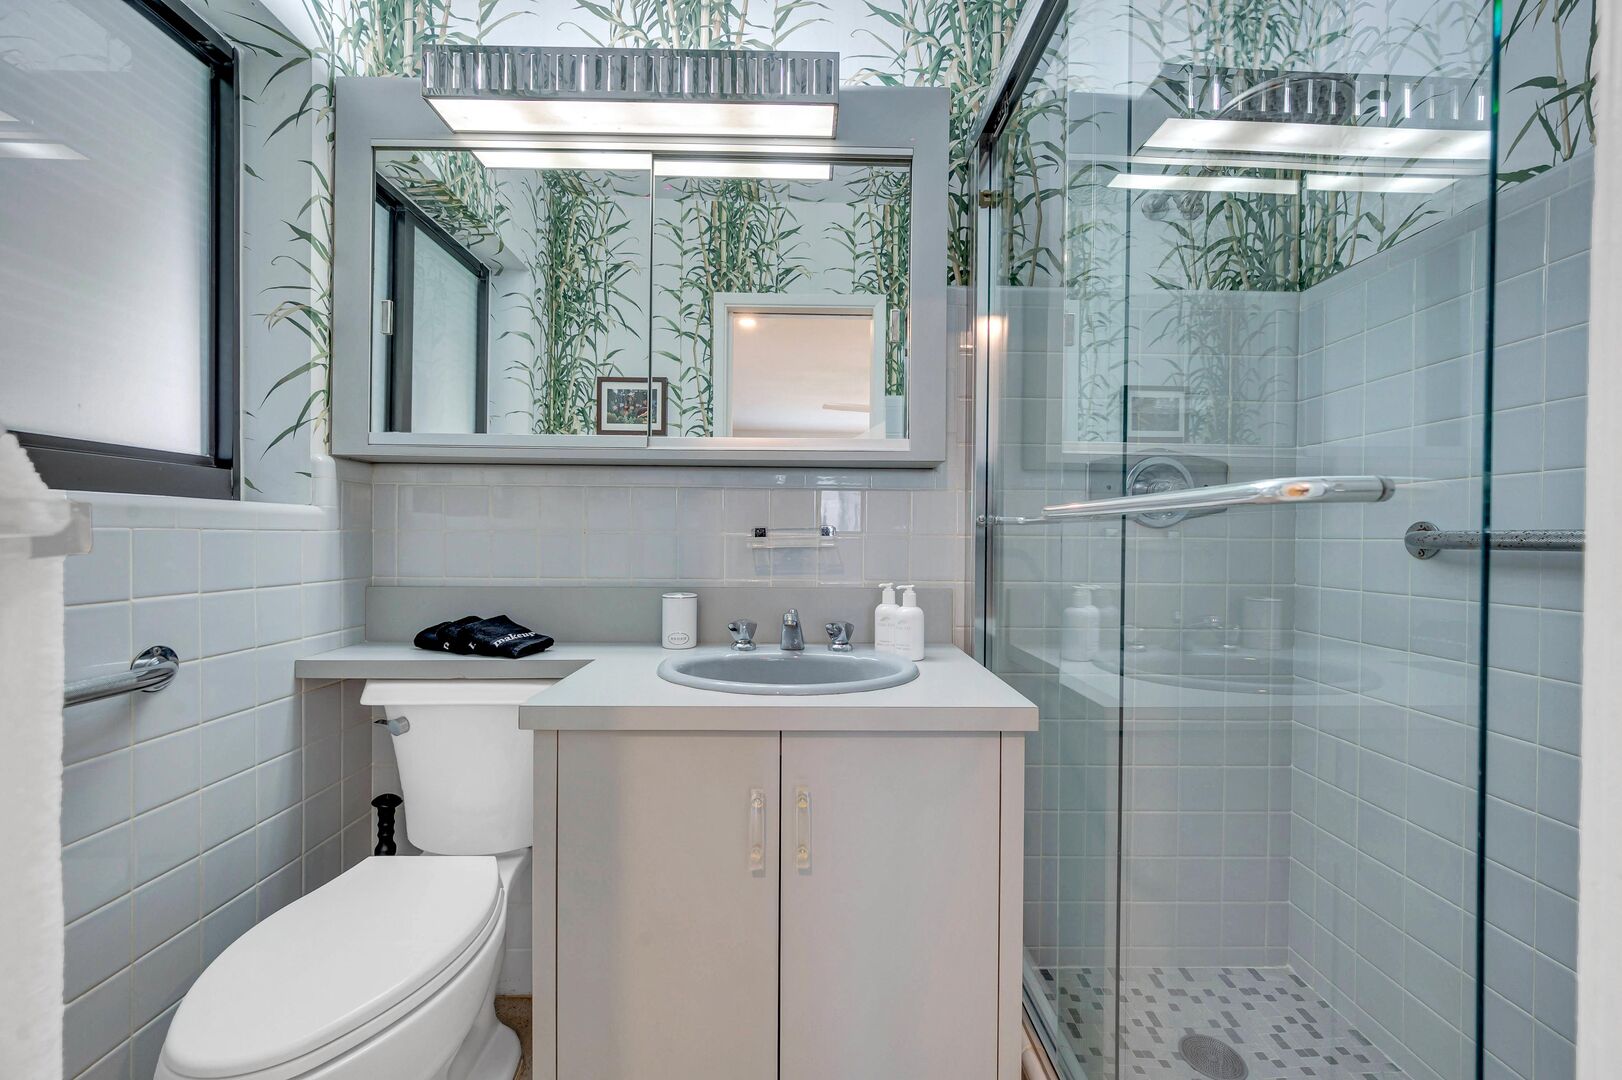 The primary en-suite full bathroom with a walk-in shower.